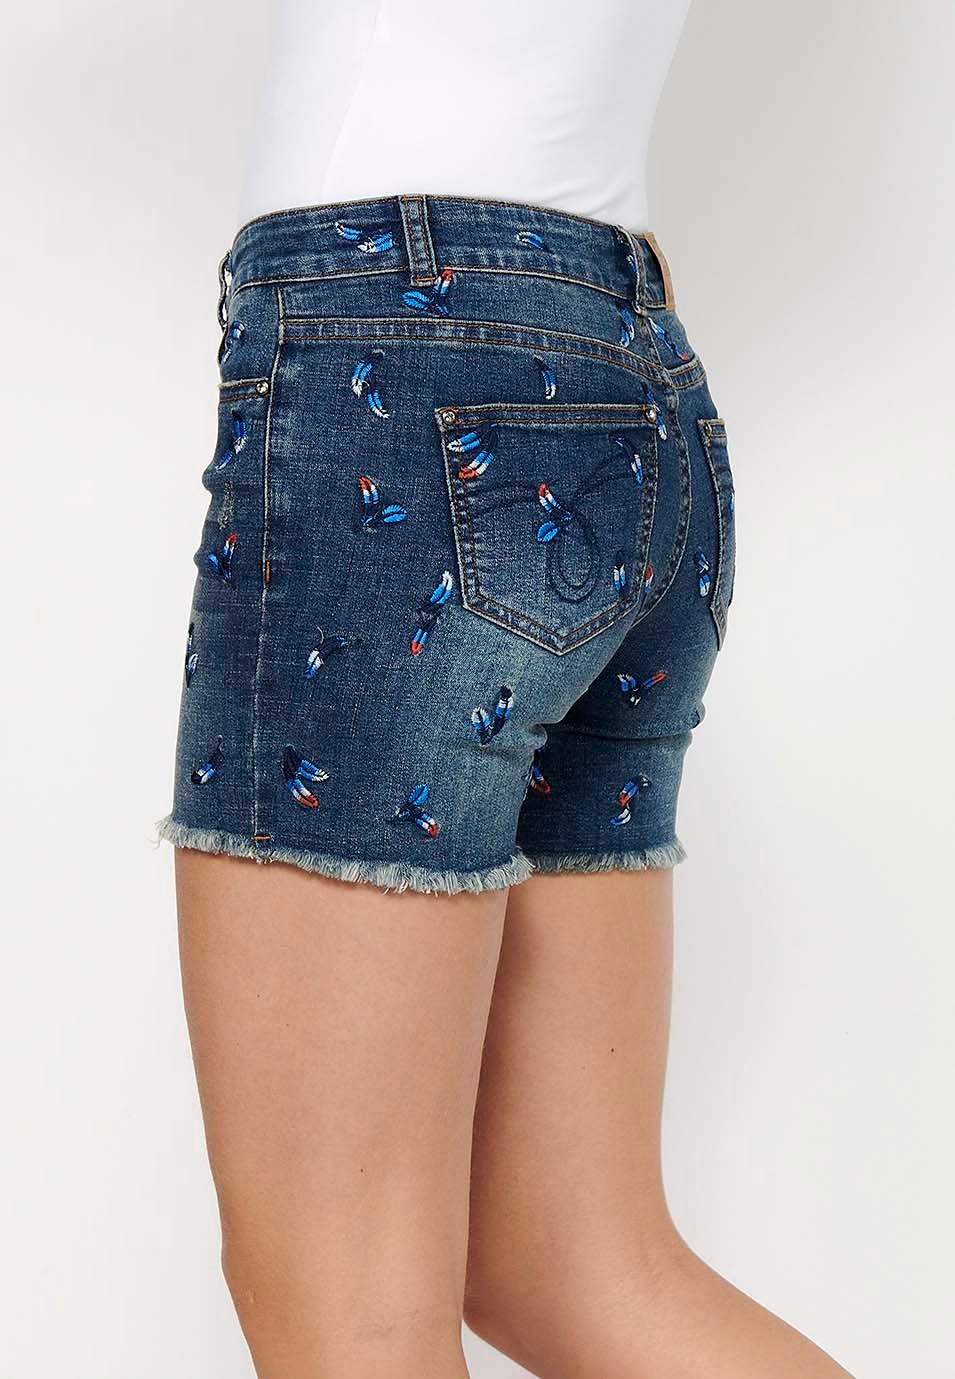 Denim shorts with front zipper and button closure and embroidered fabric with five pockets, one blue pocket pocket for women 8